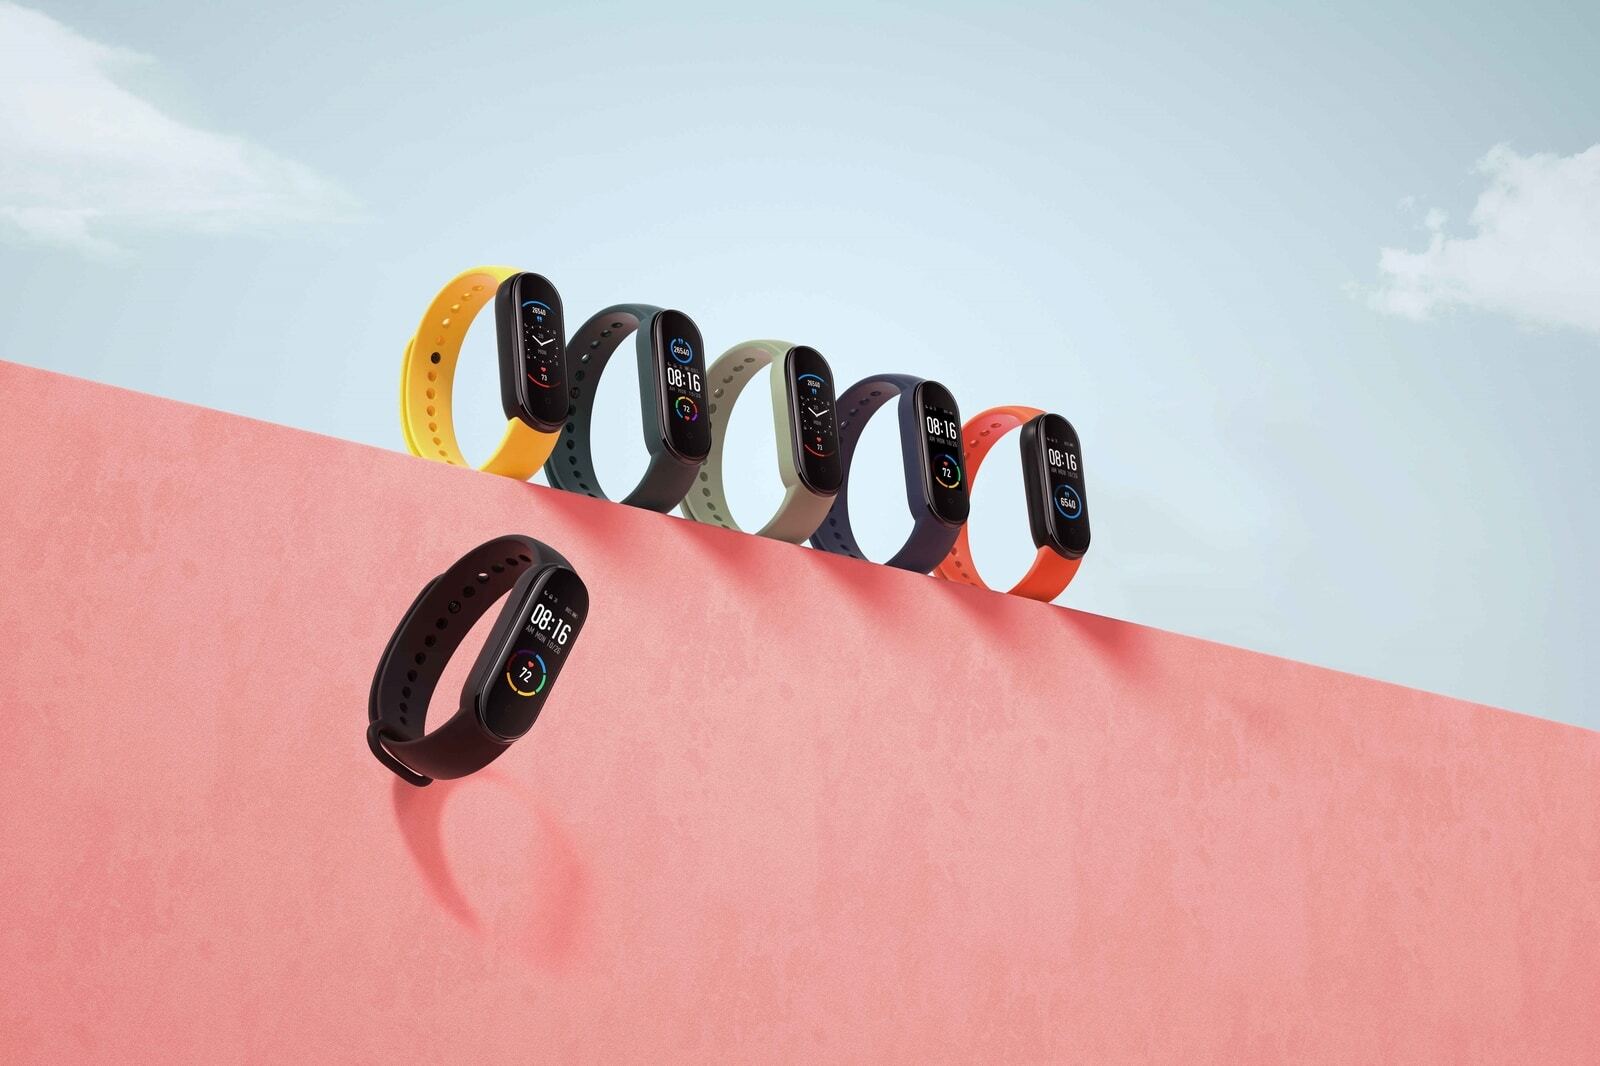 Xiaomi Mi Smart Band 5 is official: bigger screen, 14 days of battery life, lots of colors